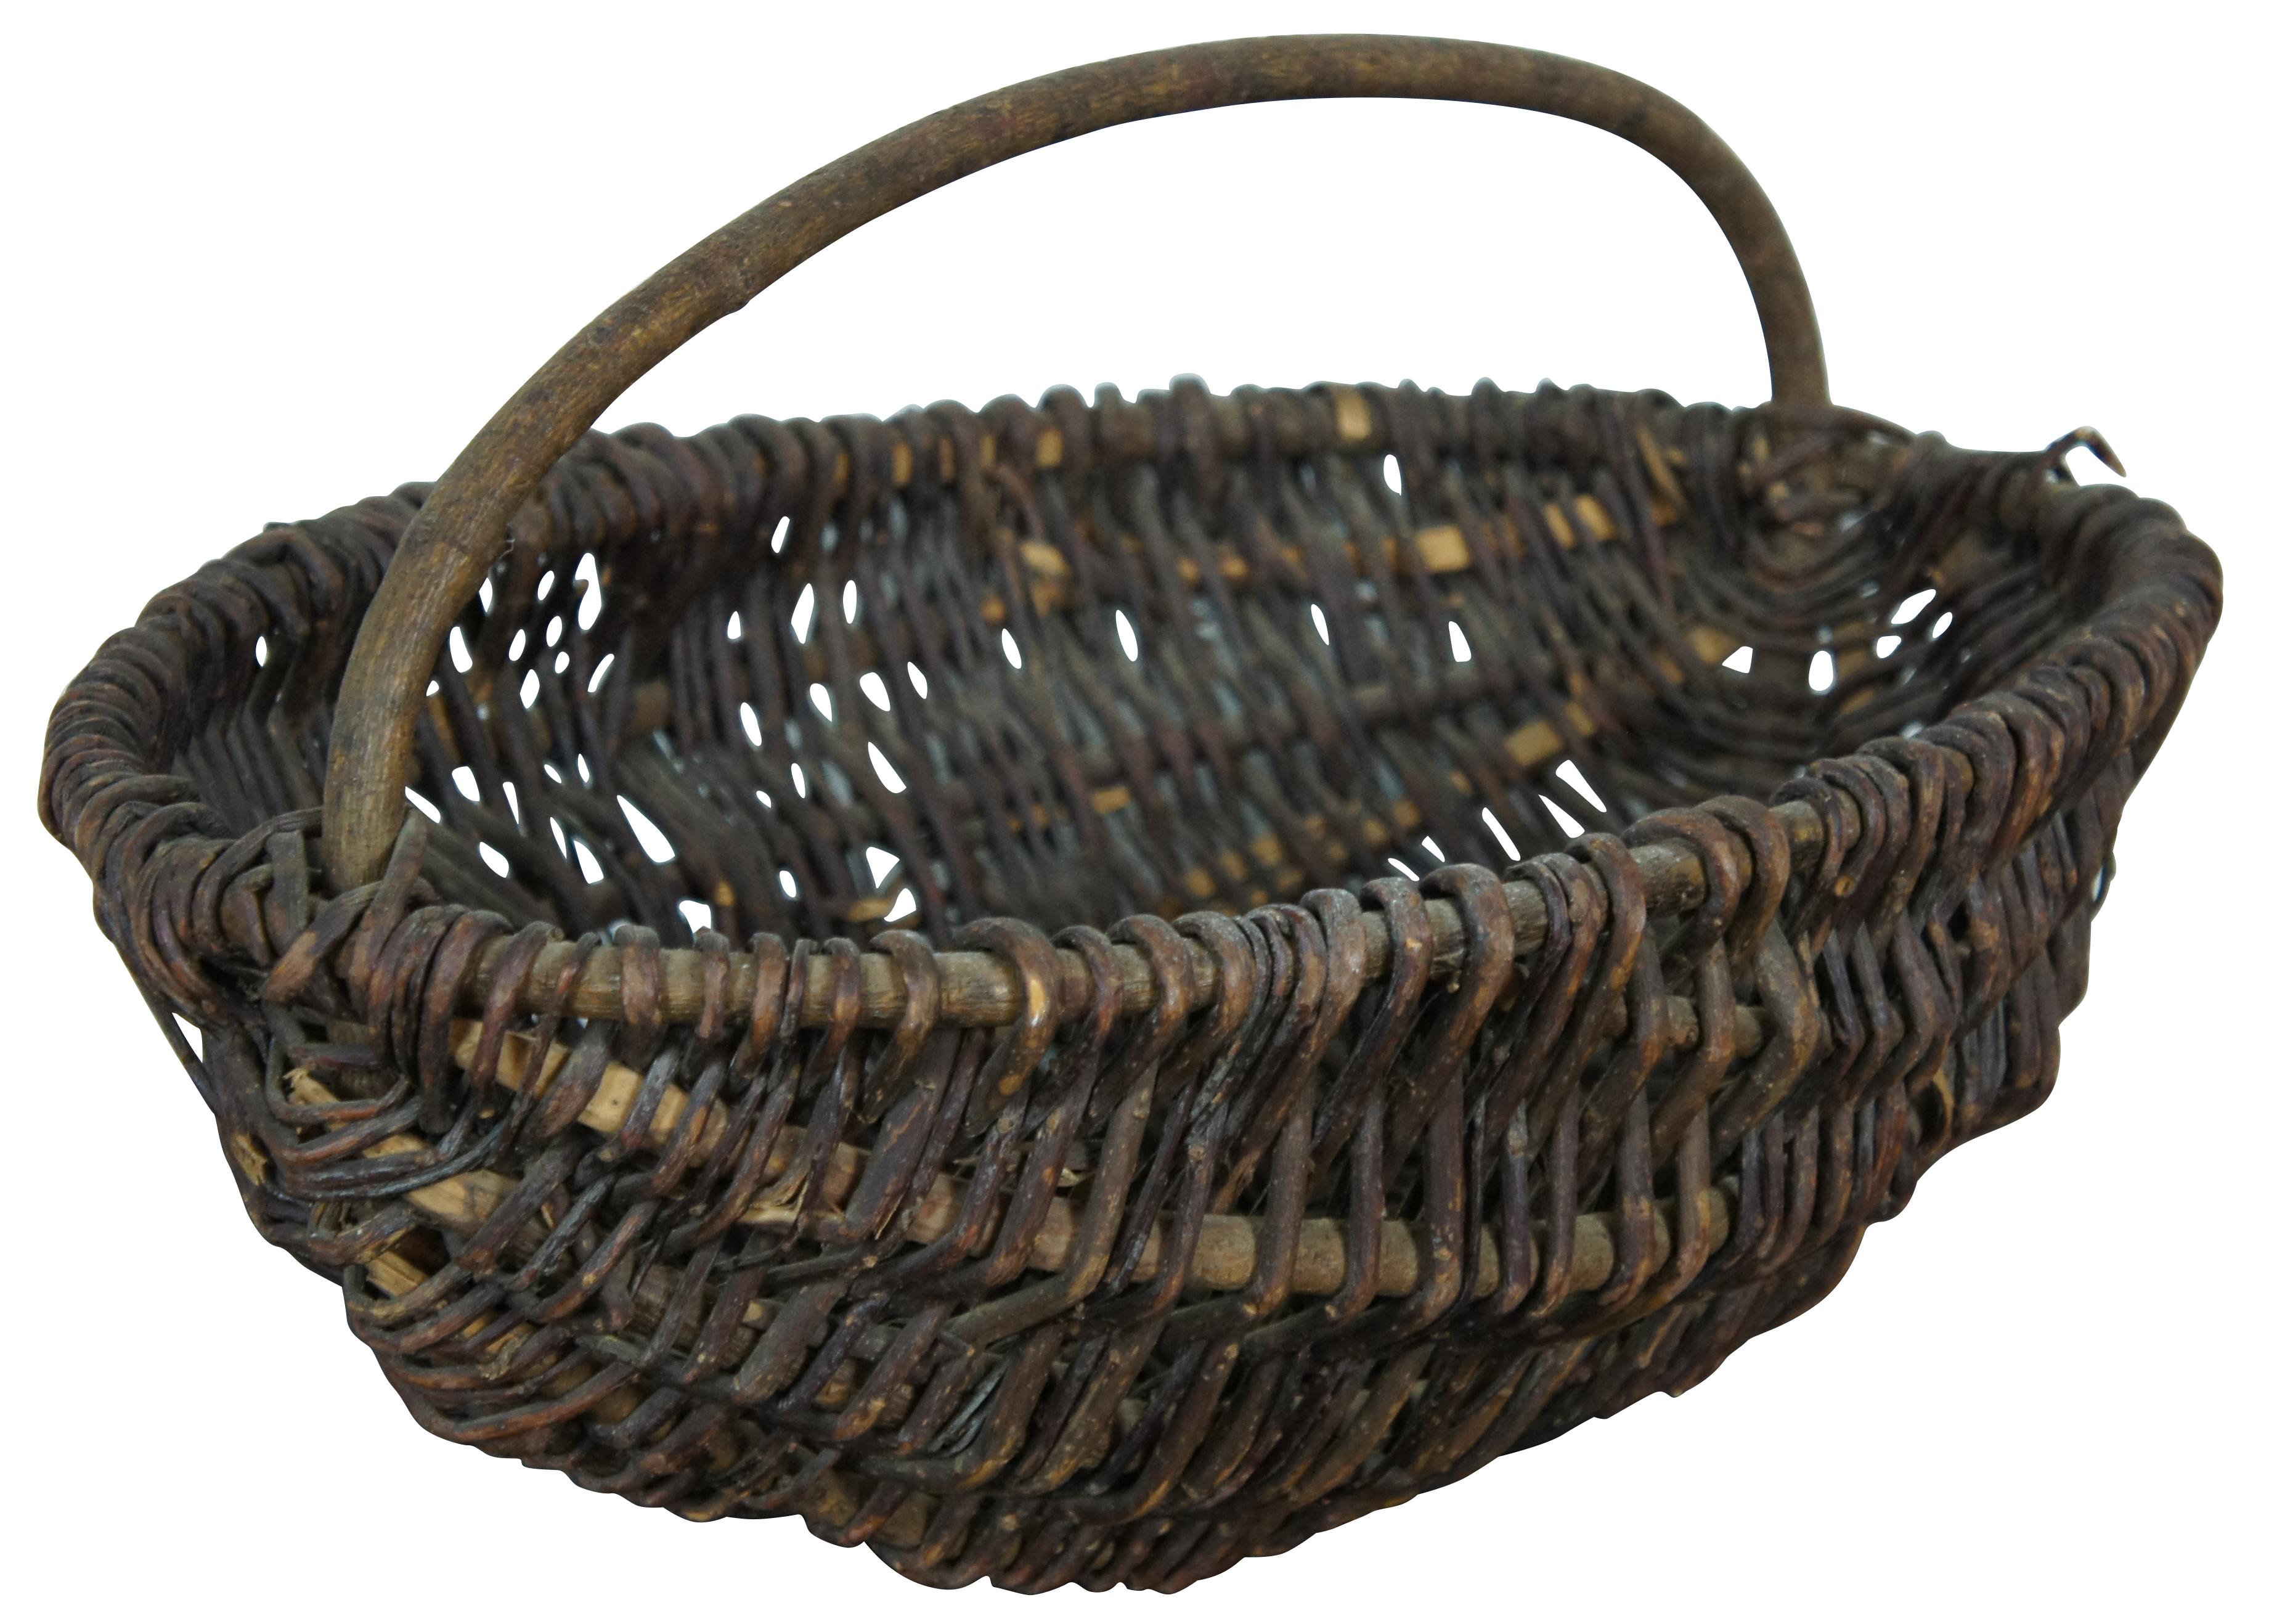 Antique primitive hand woven willow reed harvest or gathering basket with an almond / oval shape and fixed handle. Measure: 20